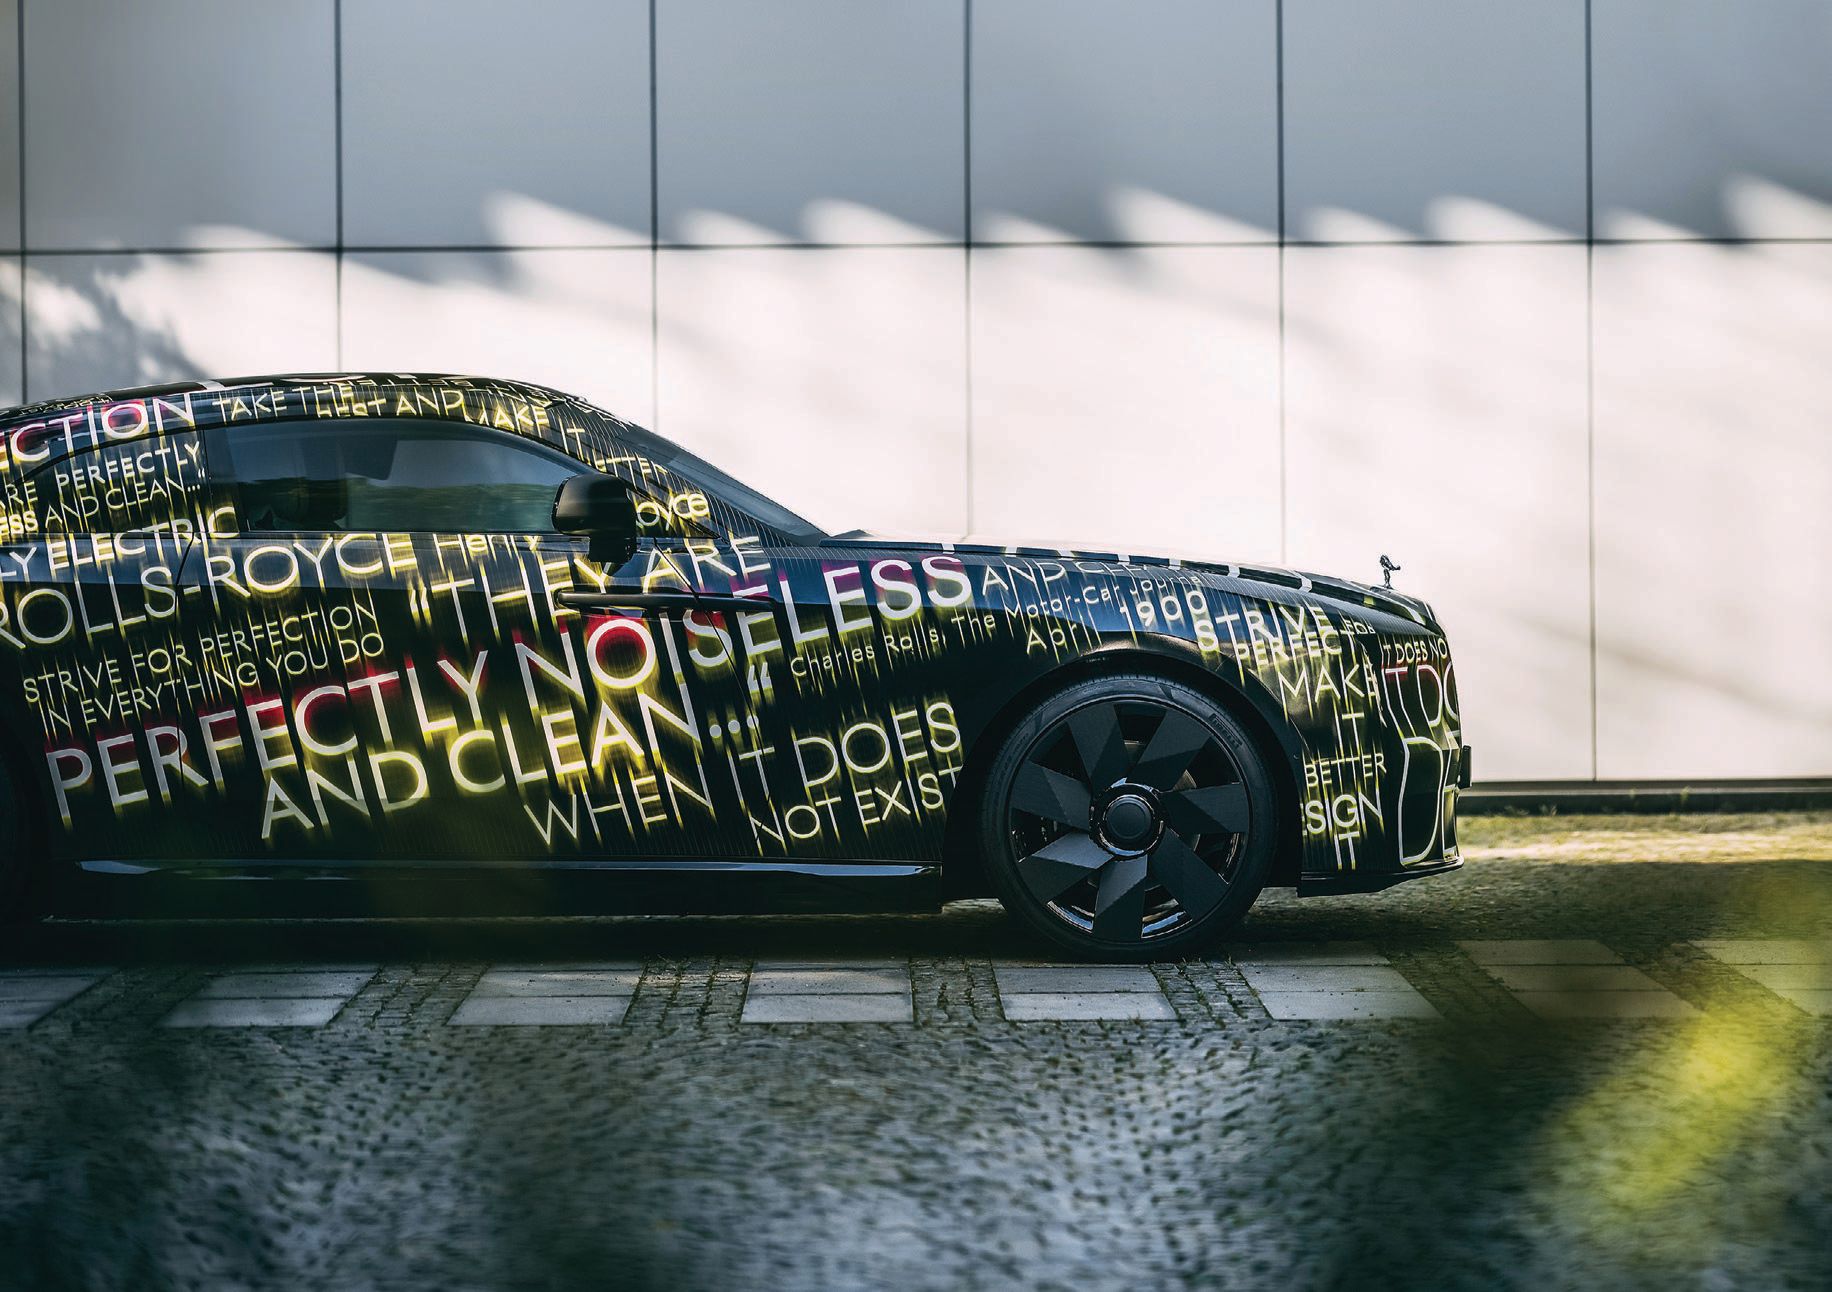 The Spectre marks Rolls-Royce's first fully electric vehicle. PHOTO COURTESY OF BRANDS